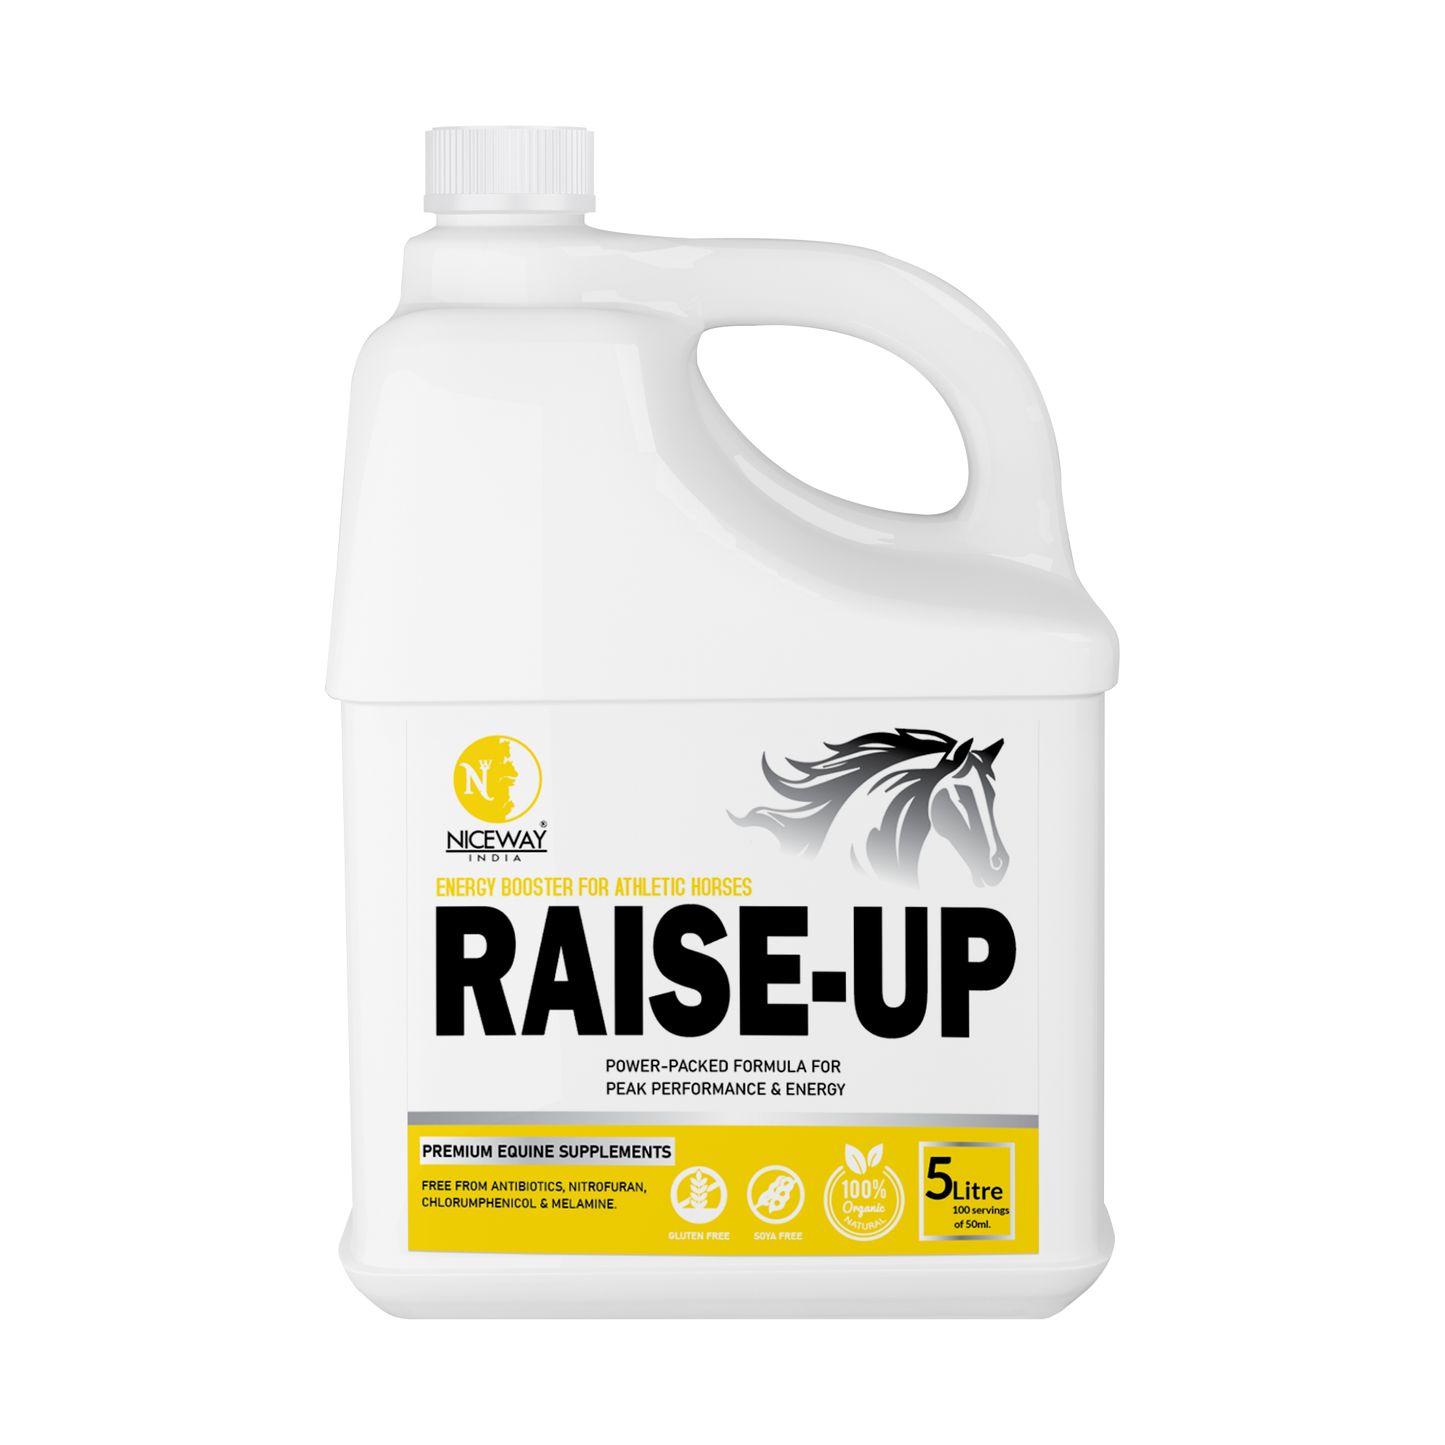 Raise-Up - Energy and Performance Booster for Athletic Horses